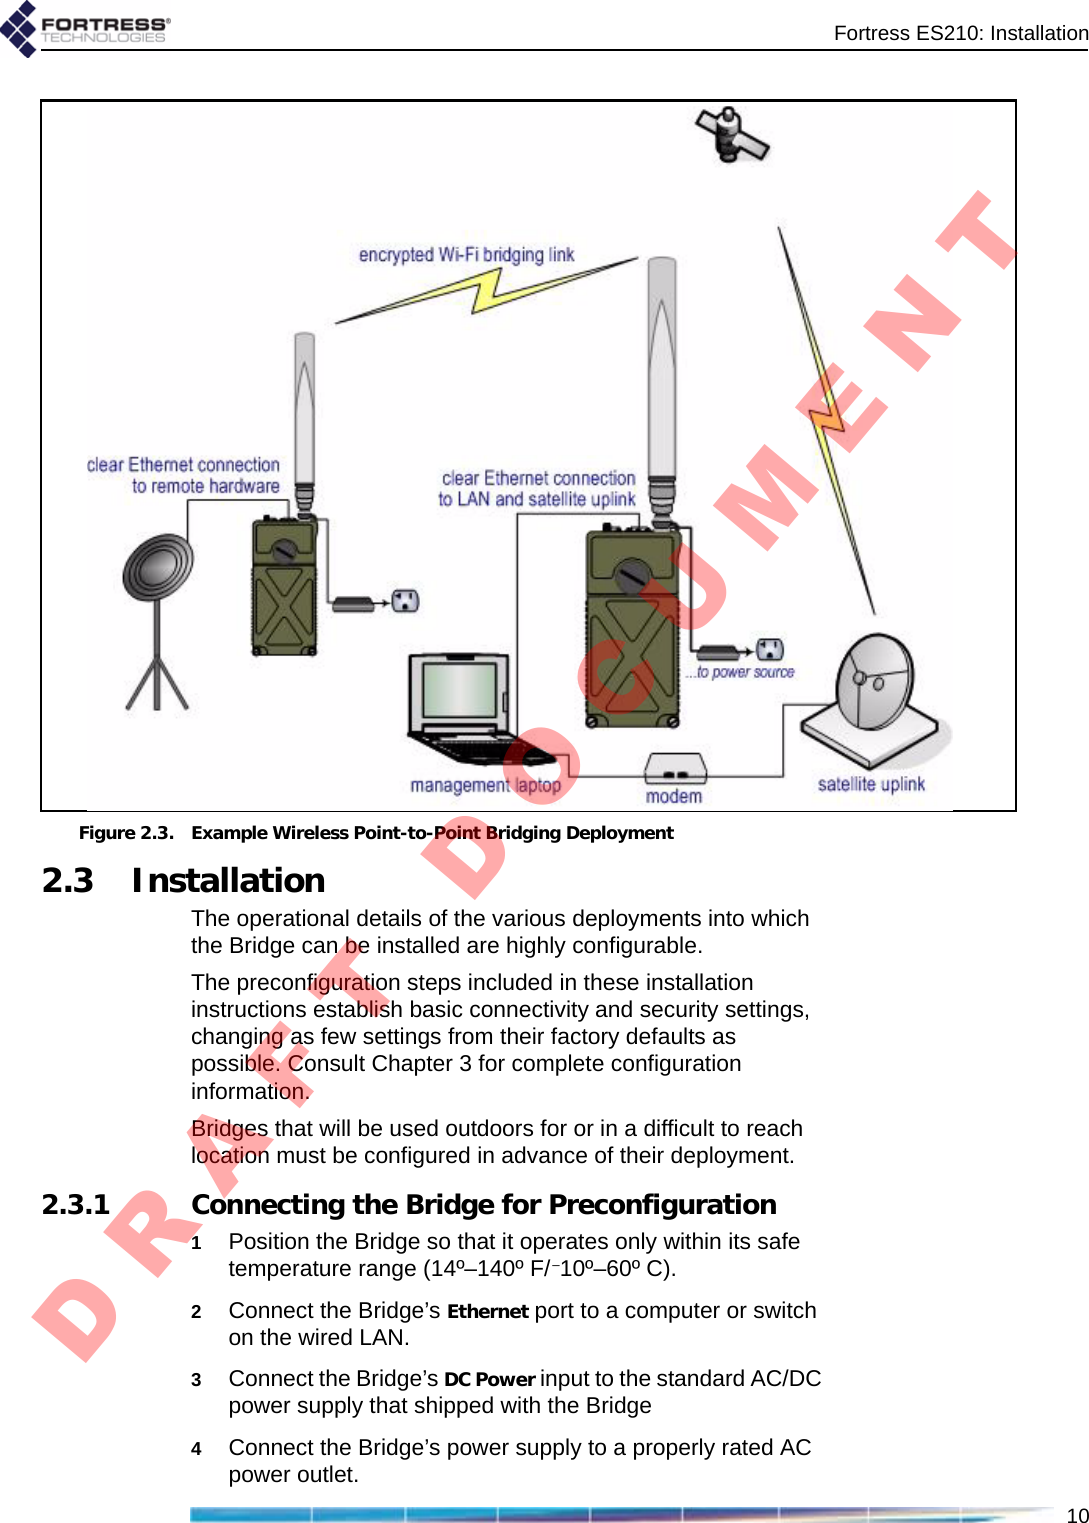 Fortress ES210: Installation10Figure 2.3. Example Wireless Point-to-Point Bridging Deployment2.3 InstallationThe operational details of the various deployments into which the Bridge can be installed are highly configurable. The preconfiguration steps included in these installation instructions establish basic connectivity and security settings, changing as few settings from their factory defaults as possible. Consult Chapter 3 for complete configuration information.Bridges that will be used outdoors for or in a difficult to reach location must be configured in advance of their deployment.2.3.1 Connecting the Bridge for Preconfiguration1Position the Bridge so that it operates only within its safe temperature range (14º–140º F/–10º–60º C).2Connect the Bridge’s Ethernet port to a computer or switch on the wired LAN.3Connect the Bridge’s DC Power input to the standard AC/DC power supply that shipped with the Bridge 4Connect the Bridge’s power supply to a properly rated AC power outlet.D R A F T   D O C U M E N T